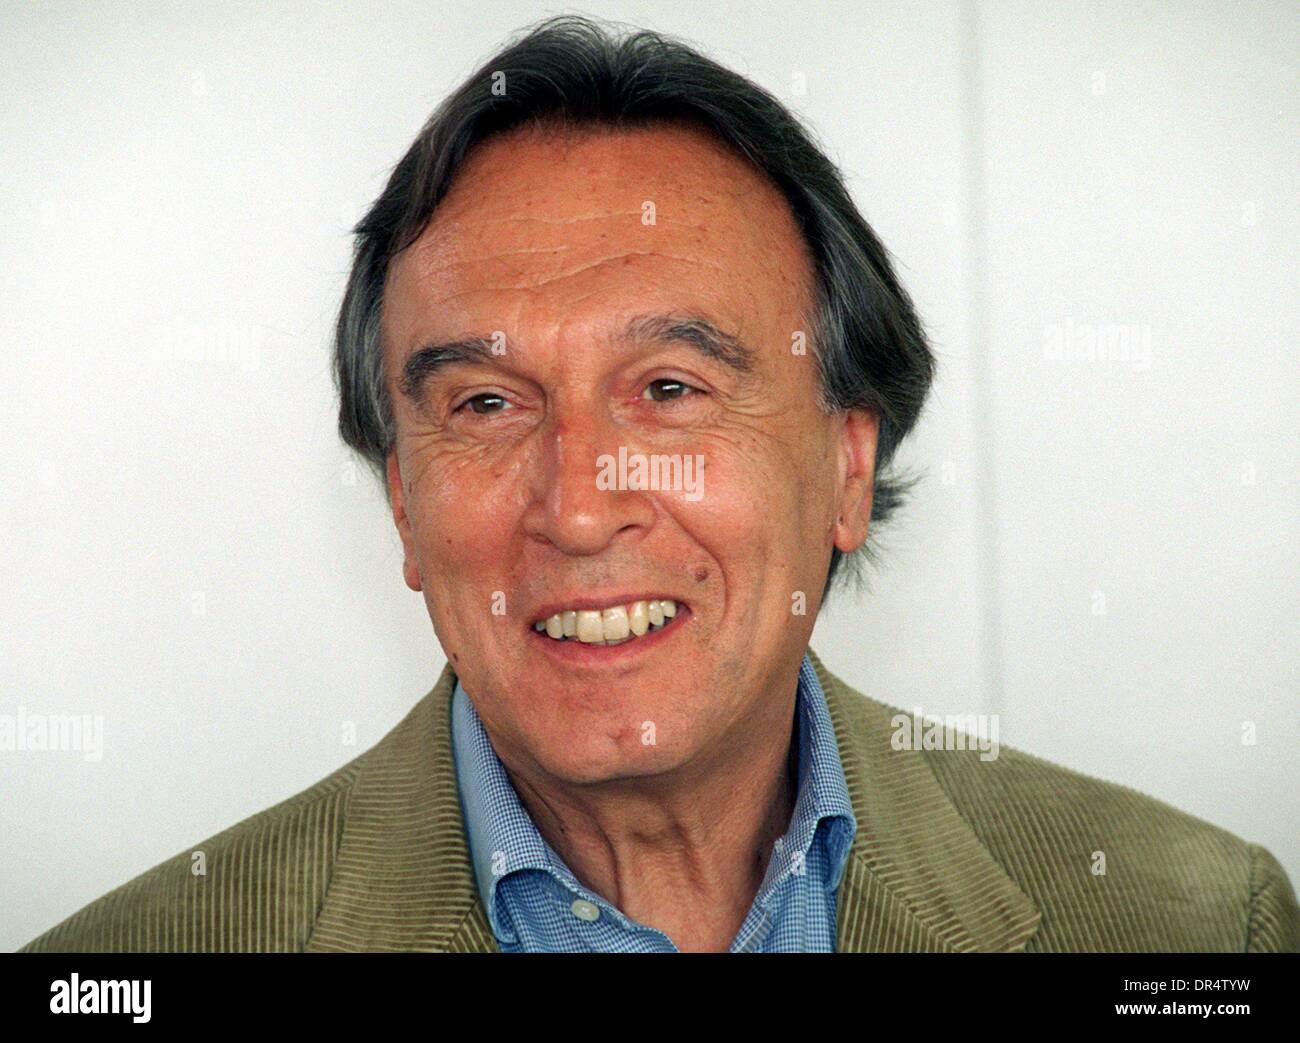 (dpa files) - Italian conductor Claudio Abbado smiles during a press conference in Berlin, 27 April 1998. Abbado was born in Milan, Italy, on 26 June 1933. He studied piano at the conservatory in Milan before beginning to conduct in Vienna. In 1960 he made his debut at La Scala in his native Milan in 1960 and served as music director there from 1968 to 1986. In 1989 he succeeded H. von Karajan as permanent conductor and artistic director of the Berlin Philharmonic, a post he held until September 2002. Stock Photo